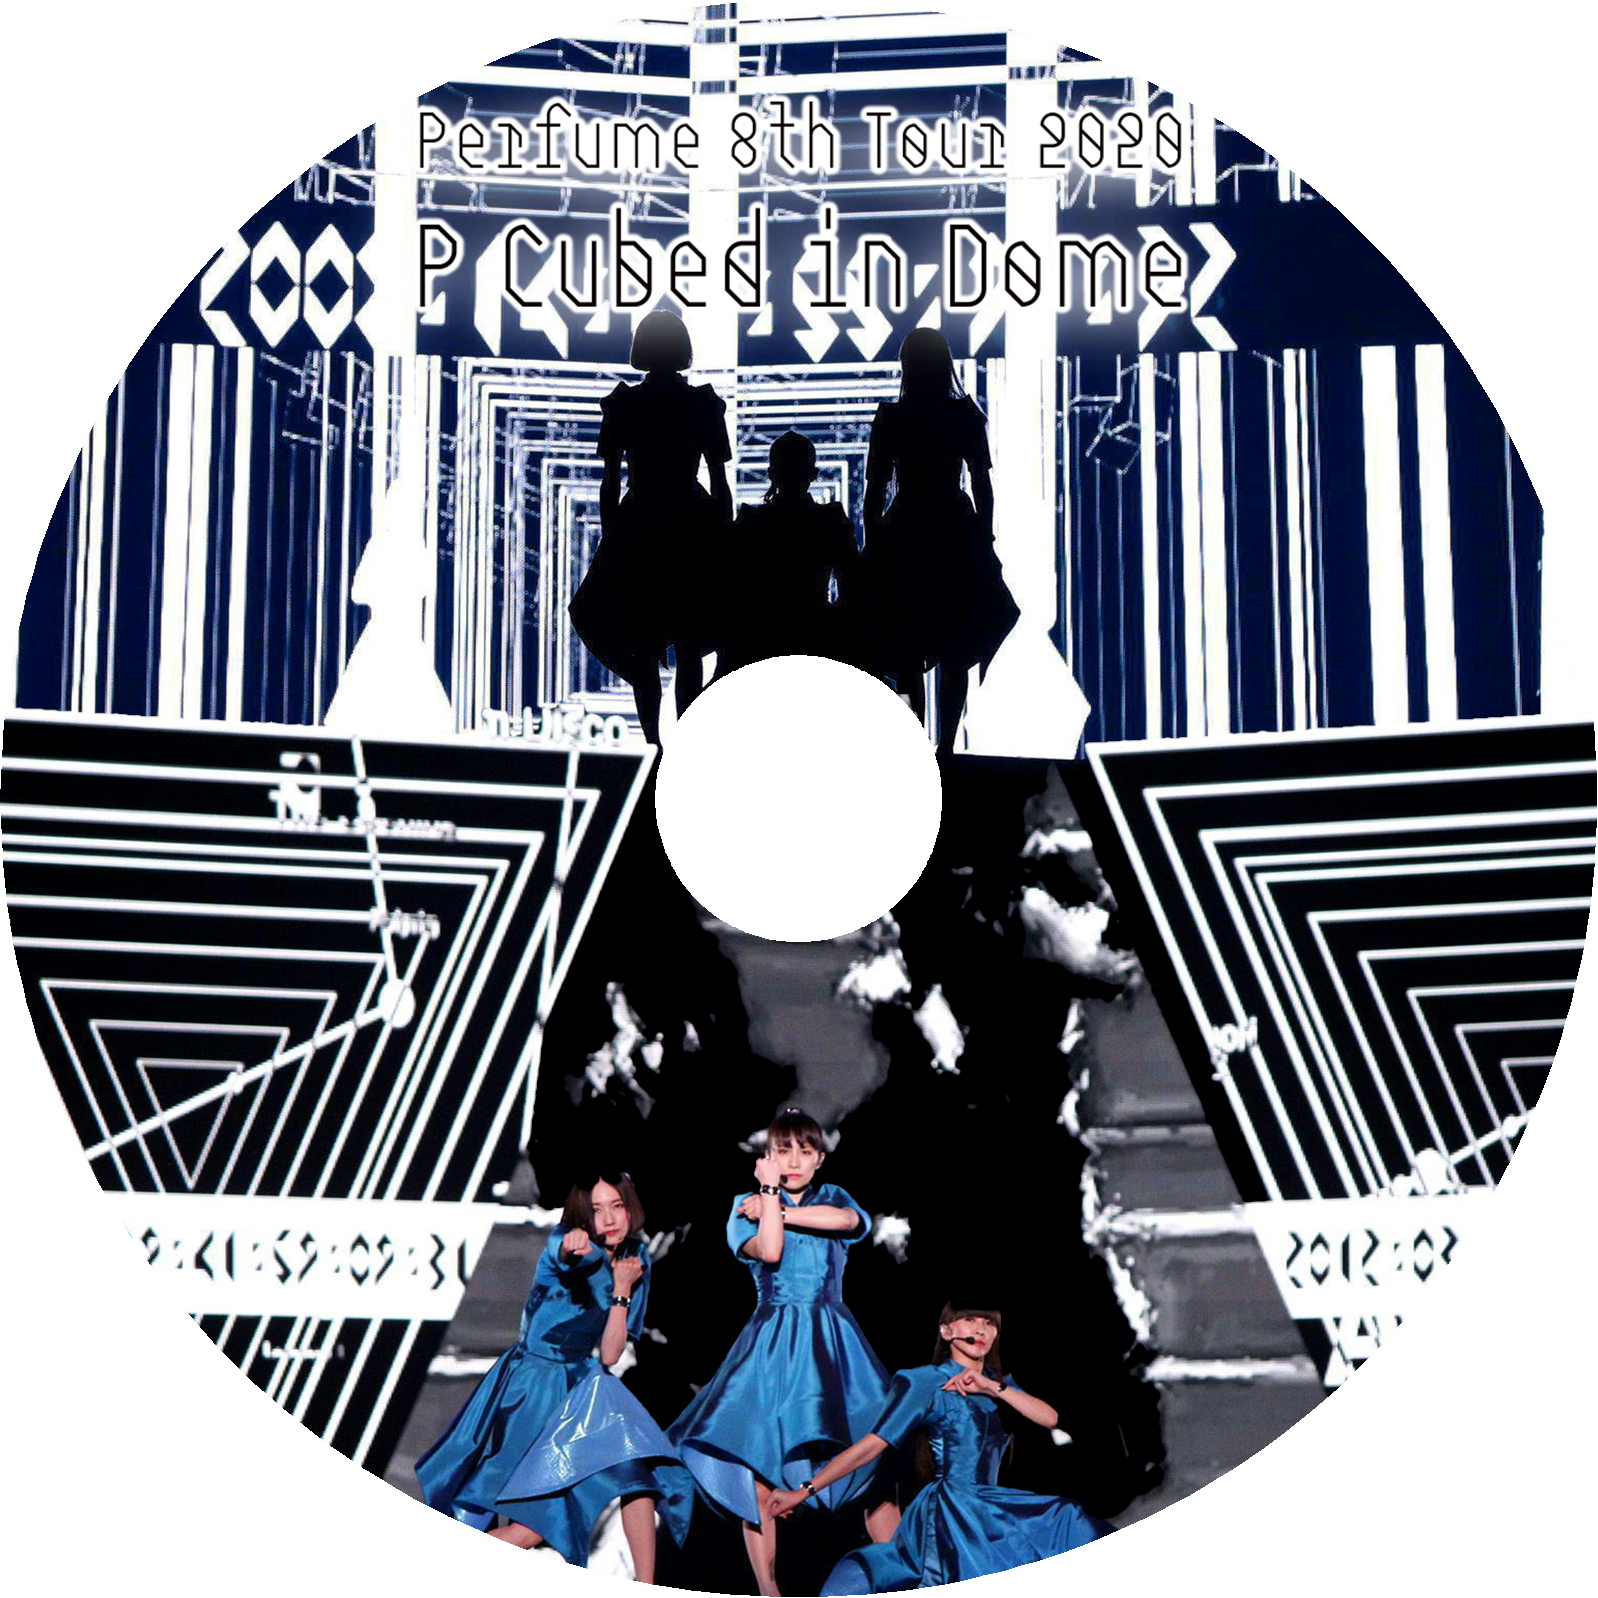 Perfume 8th Tour 2020 “P Cubed” in Dome　ラベル